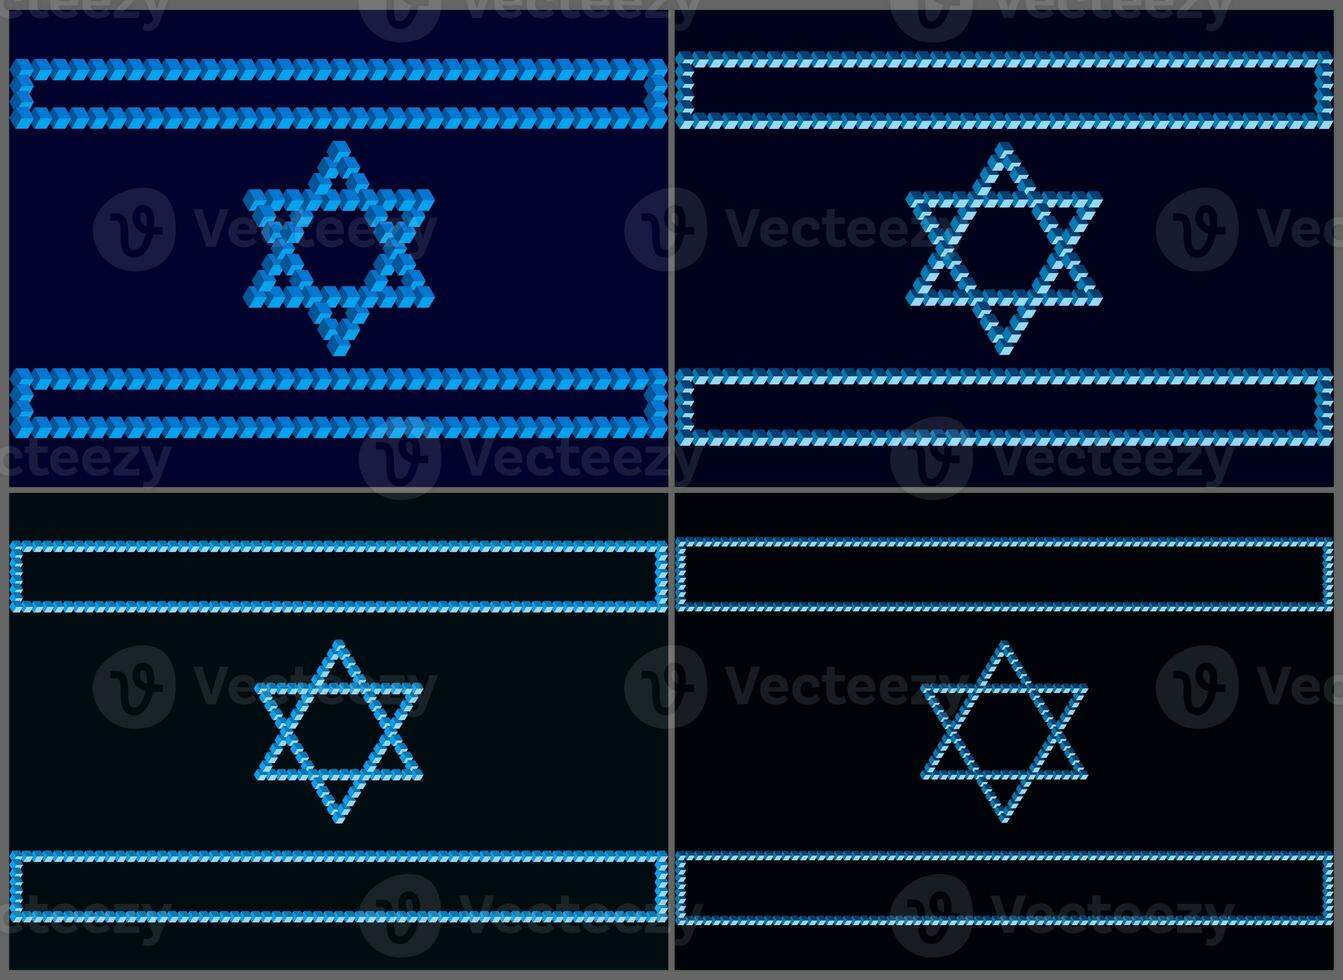 Israeli flags on a dark mournful background. Symbols of Israel based on the Penrose triangle. Monolithic basis of Israeli symbols based on unusual figures with violations of the laws of geometry photo